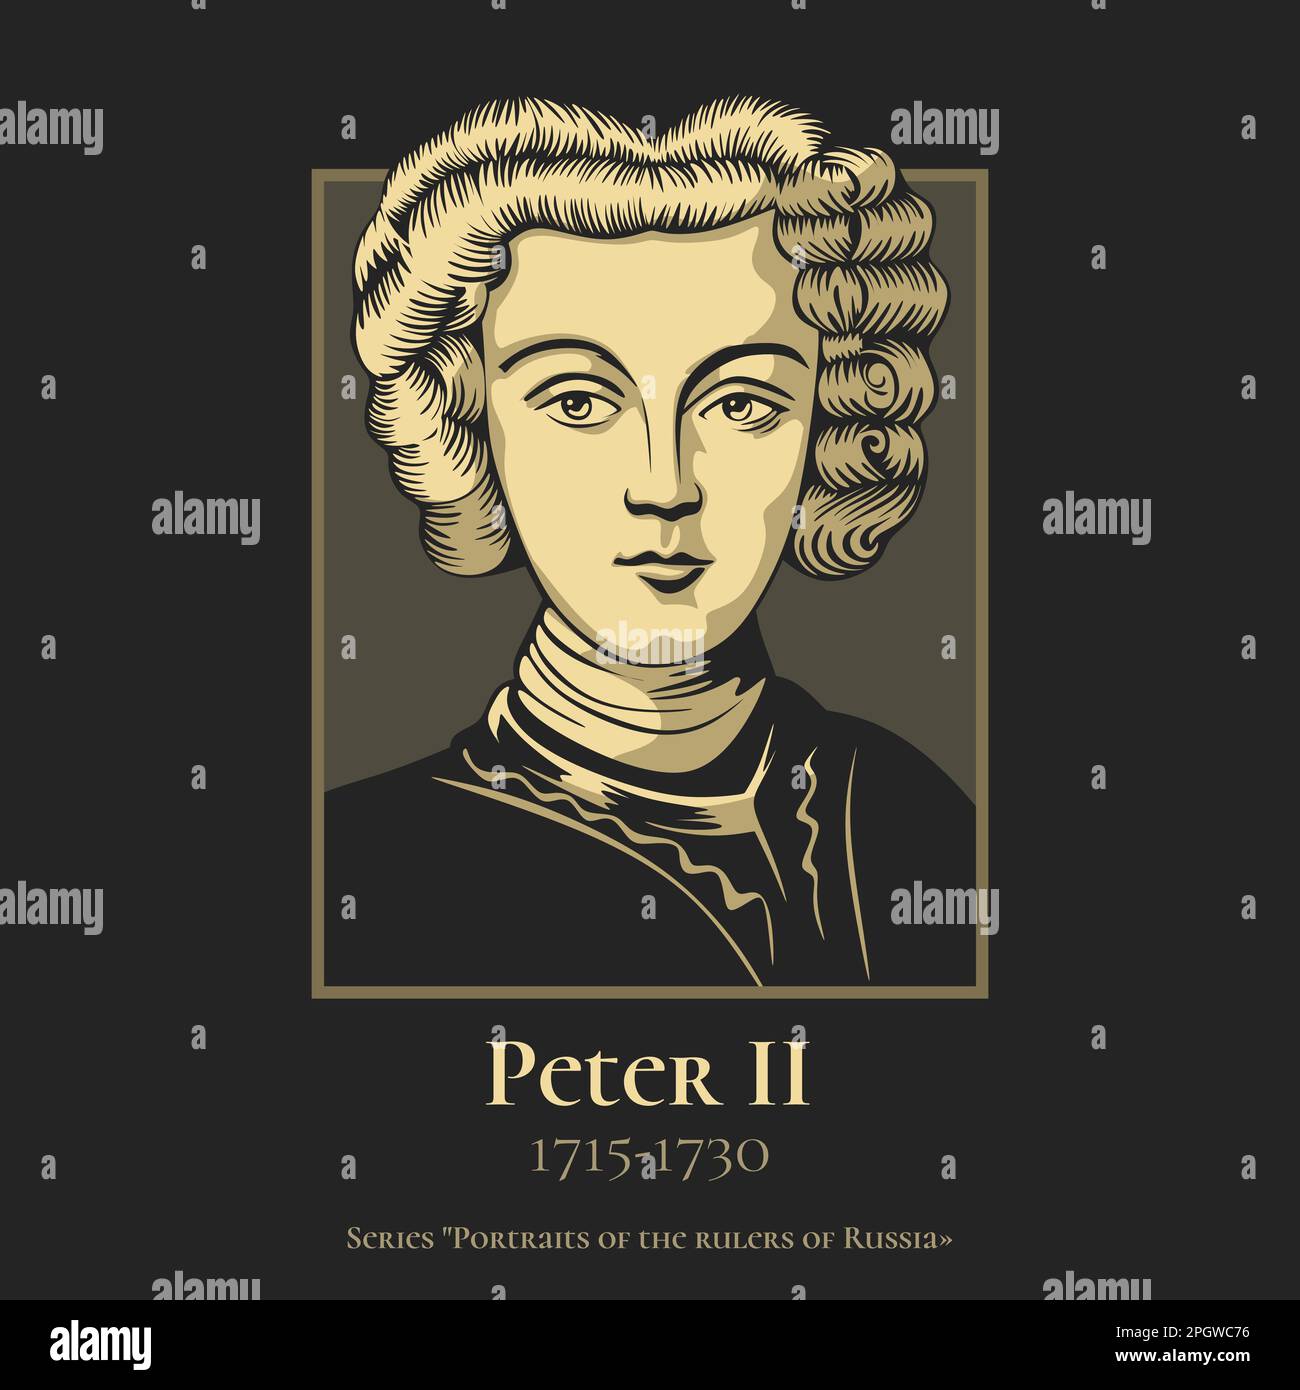 Peter II (1715-1730) reigned as Emperor of Russia from 1727 until 1730, when he died at 14. He was the last male agnatic member of the House of Romano Stock Vector